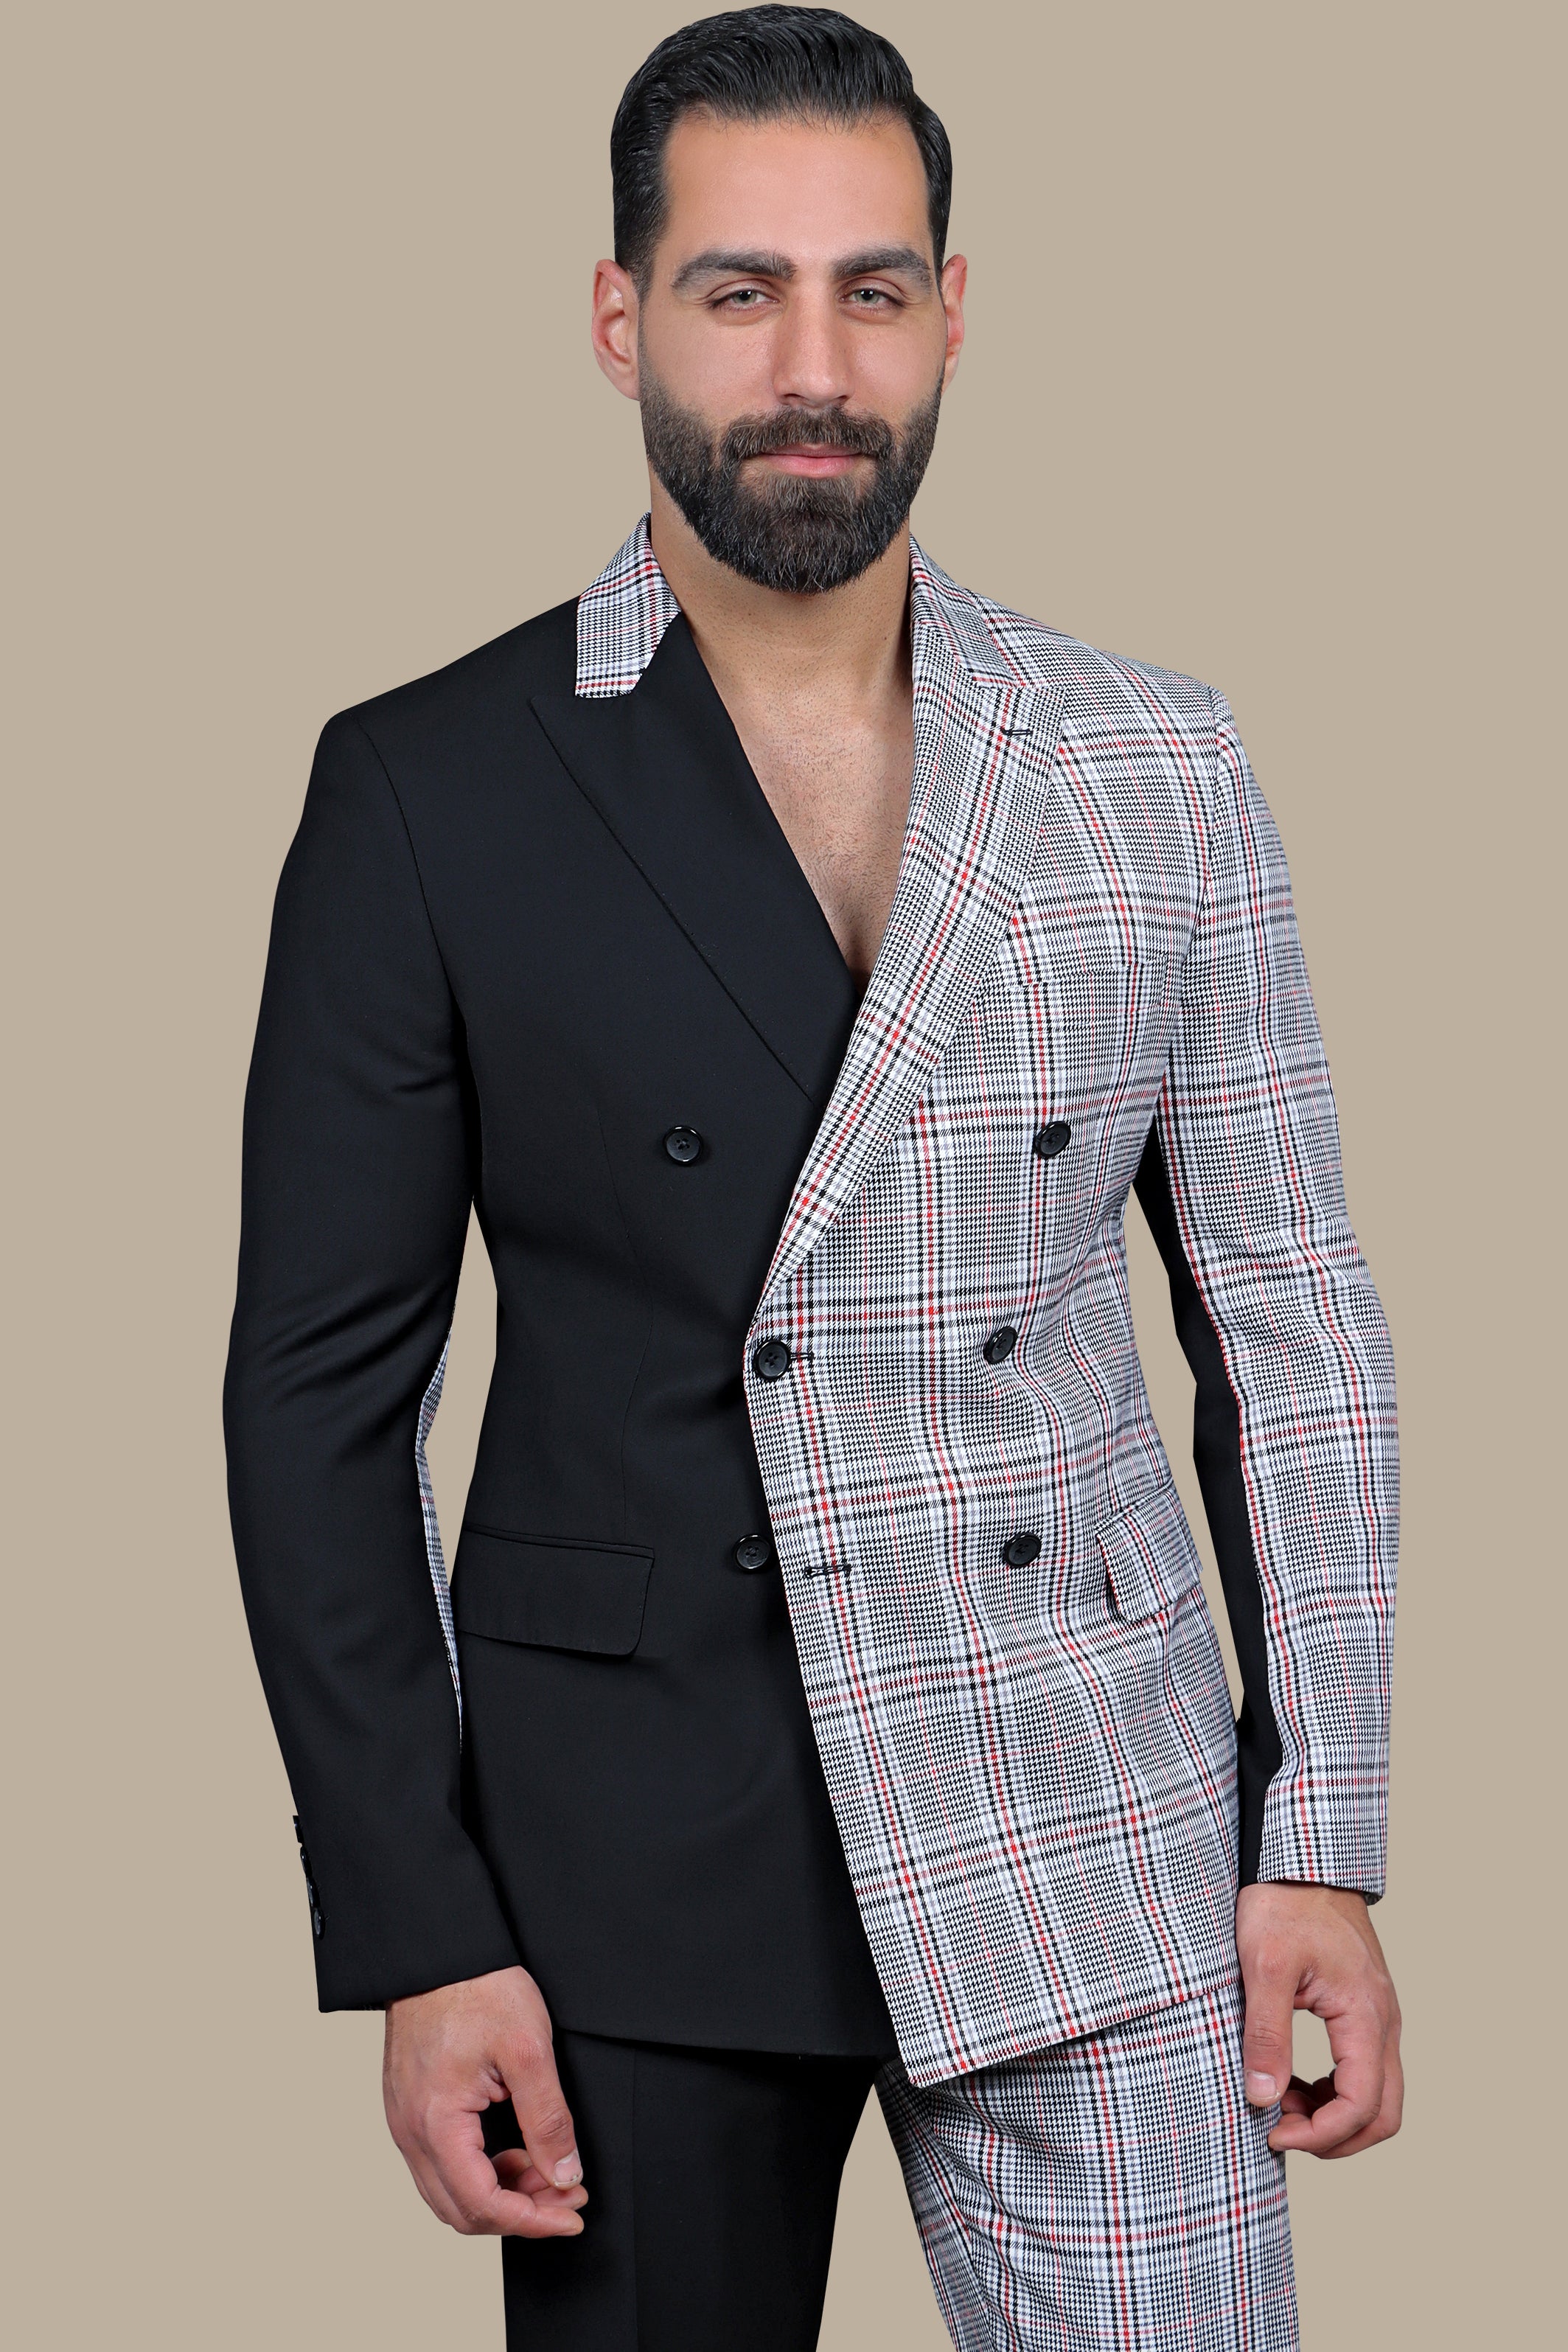 Split Symmetry: The Double-Breasted Suit FV Special Collection